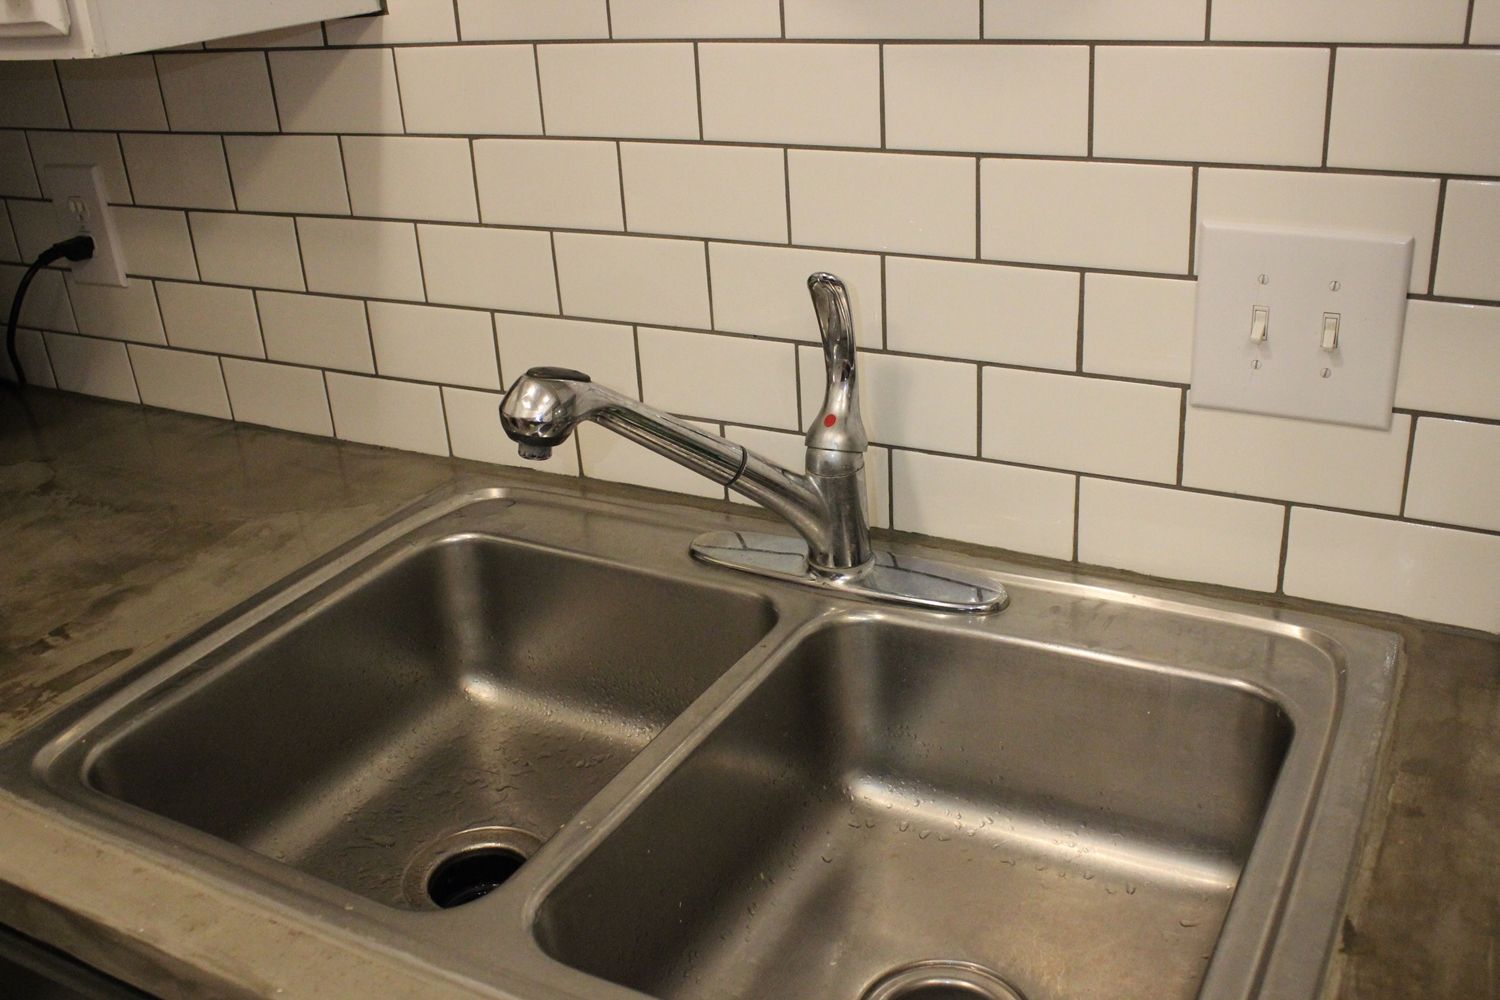 Clean also the stainless sink